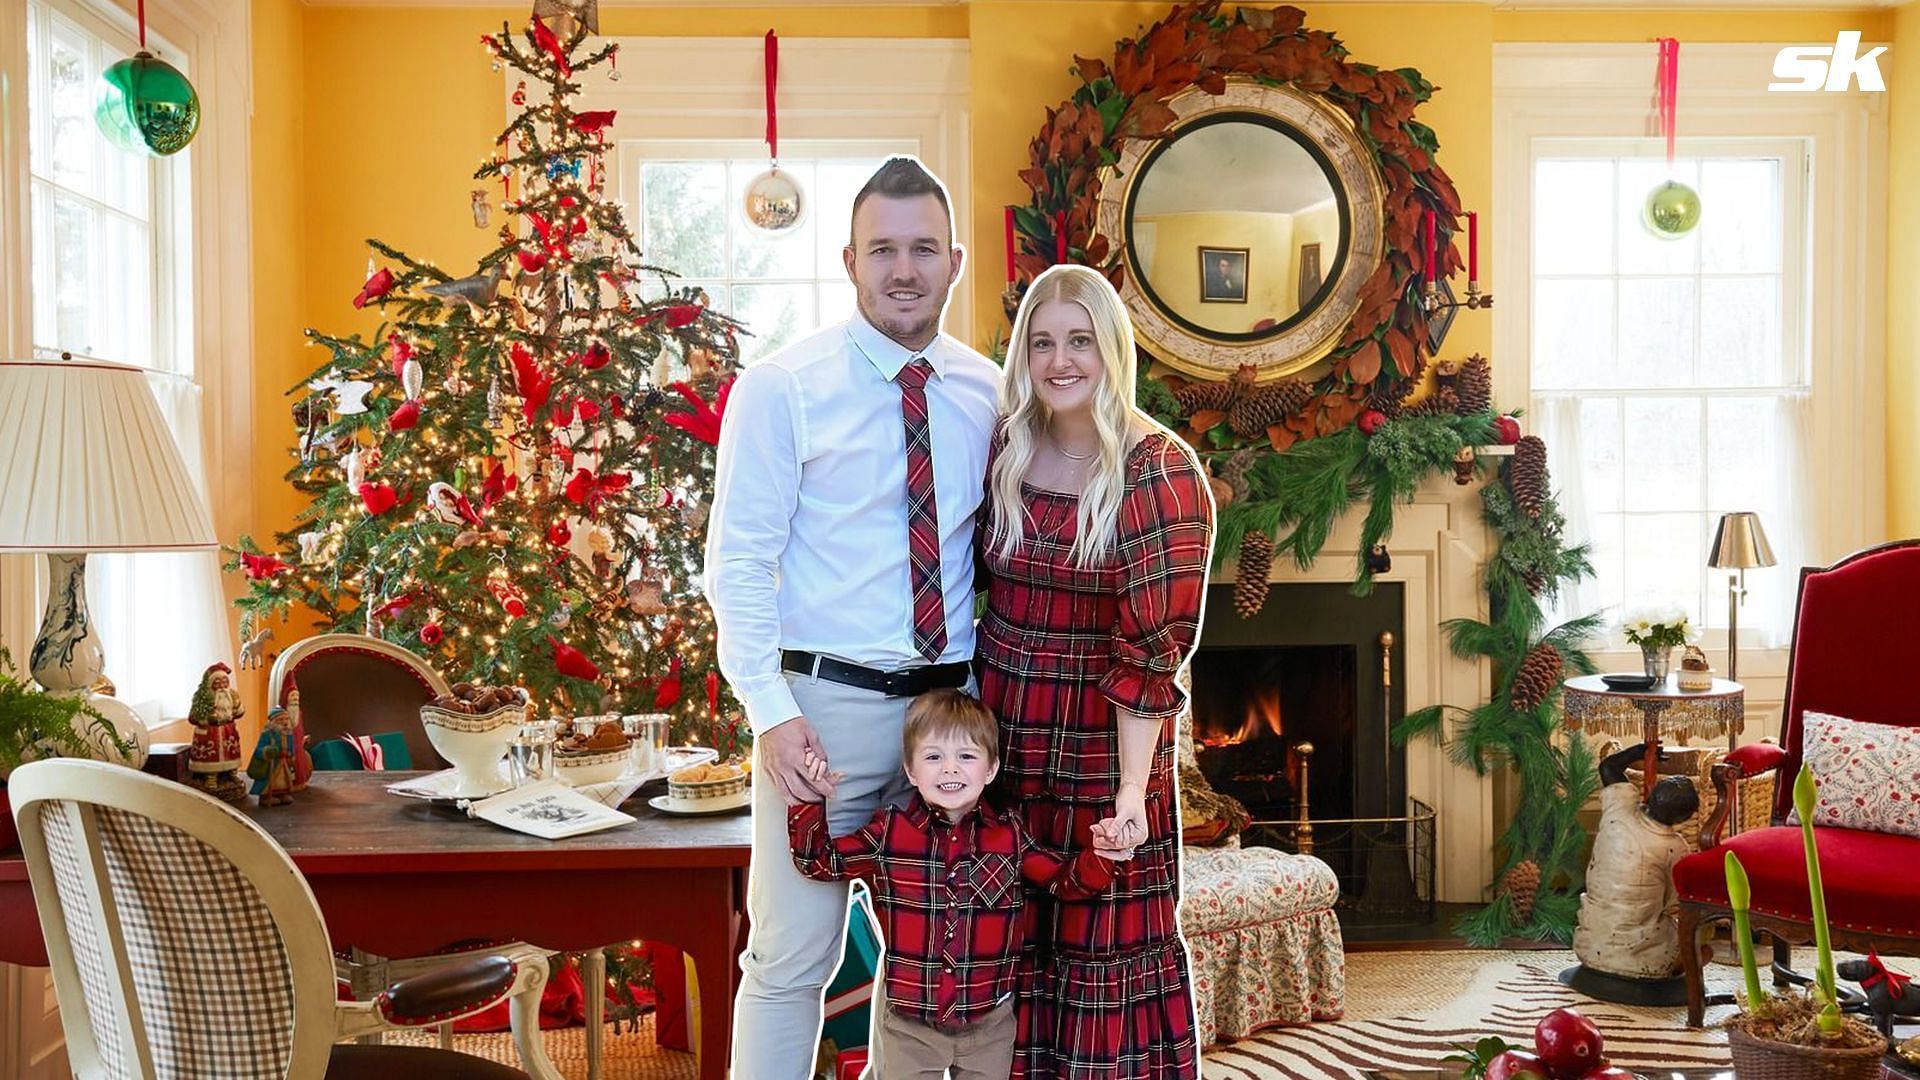 Angels outfielder Mike Trout and family unwrap holiday harmony in coordinated checkered Christmas outfits